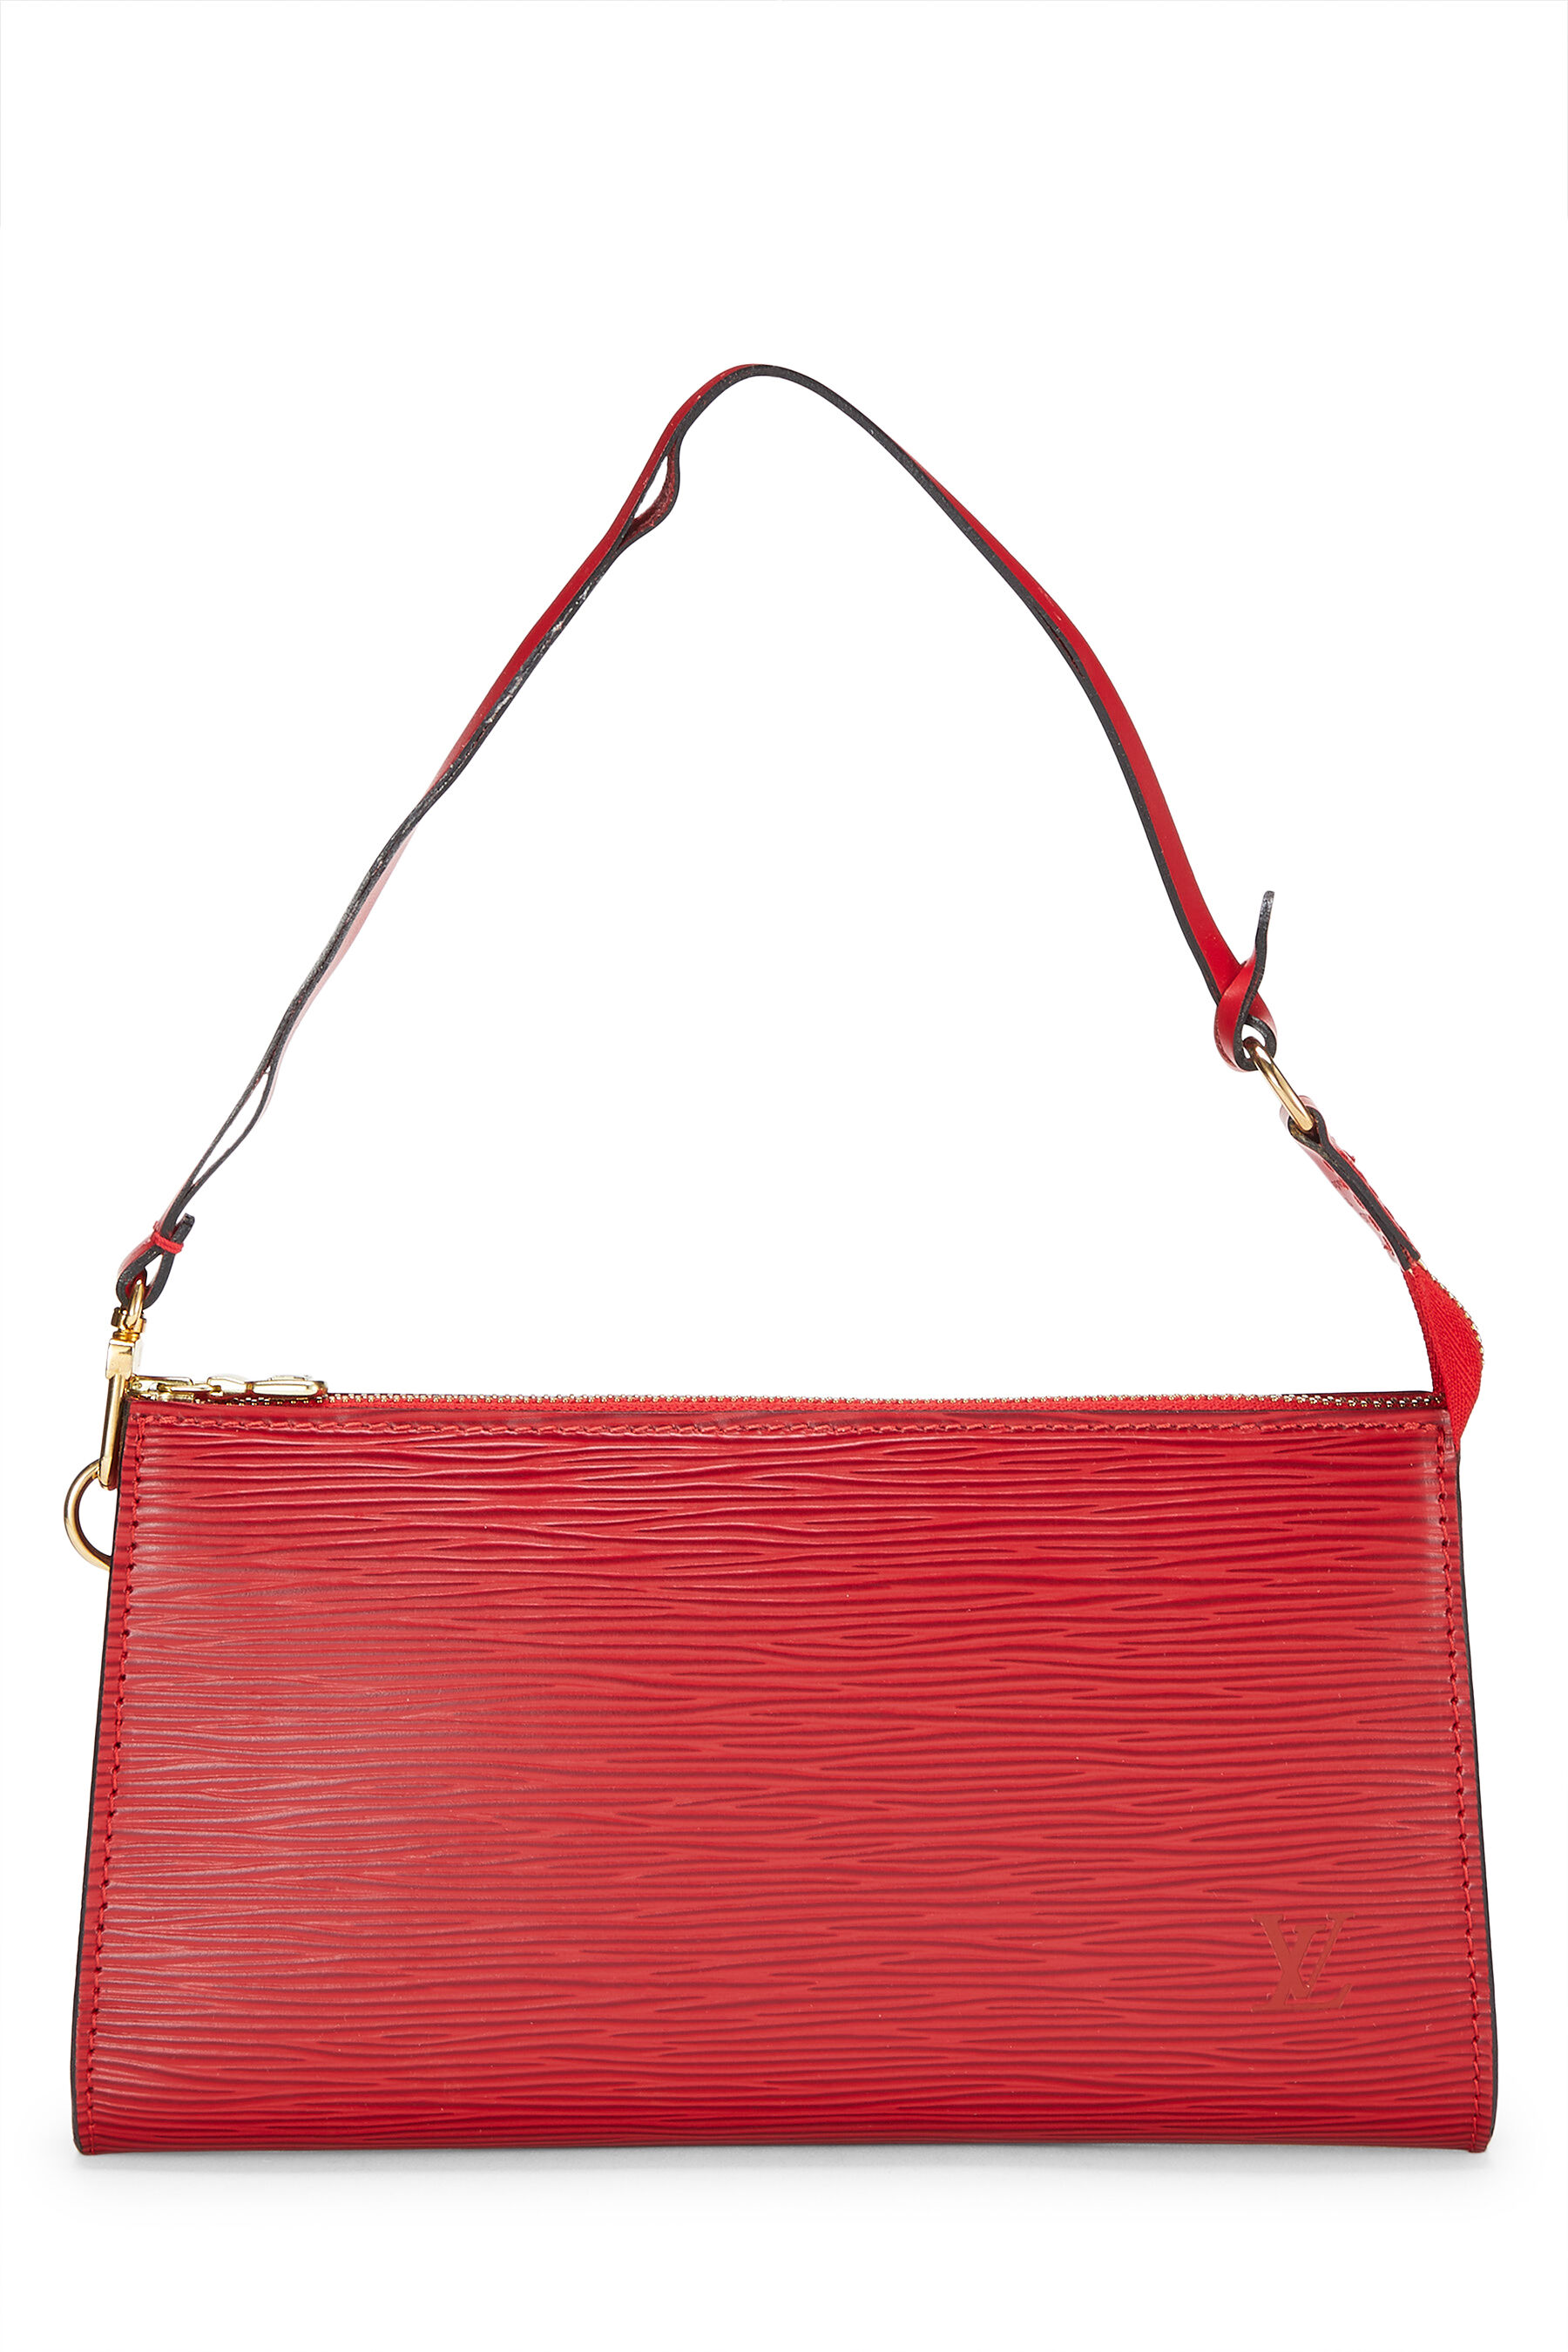 3 Secondhand Designer Handbags to Buy for Fall